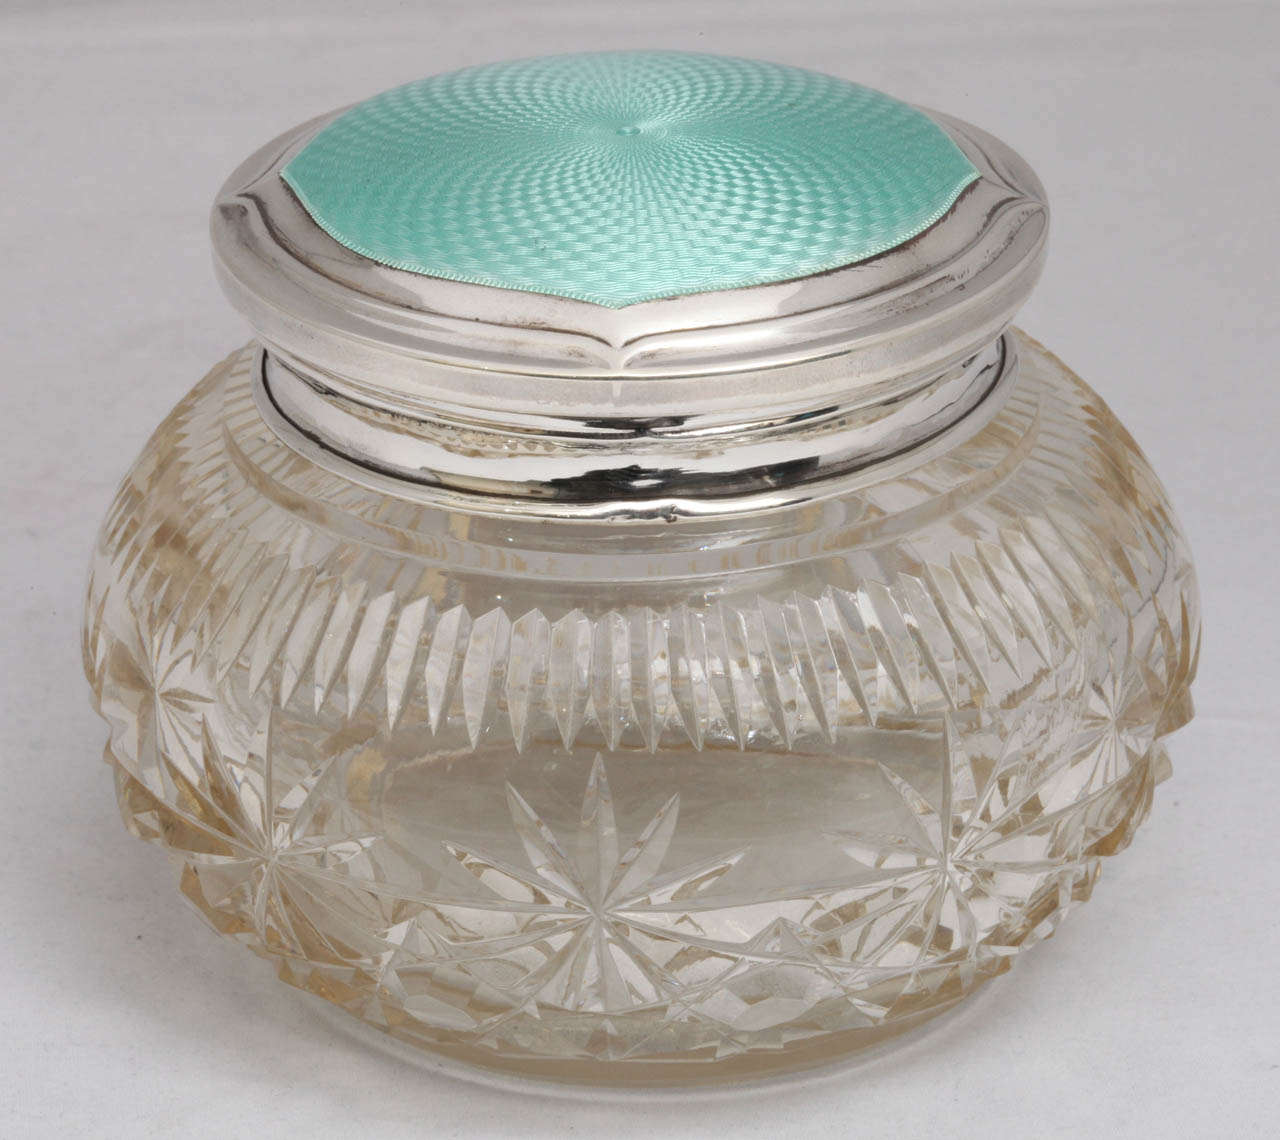 Art Deco Cut Crystal Powder Jar Mounted by a Sterling Silver and Turquoise Guilloche Enamel Lid 1